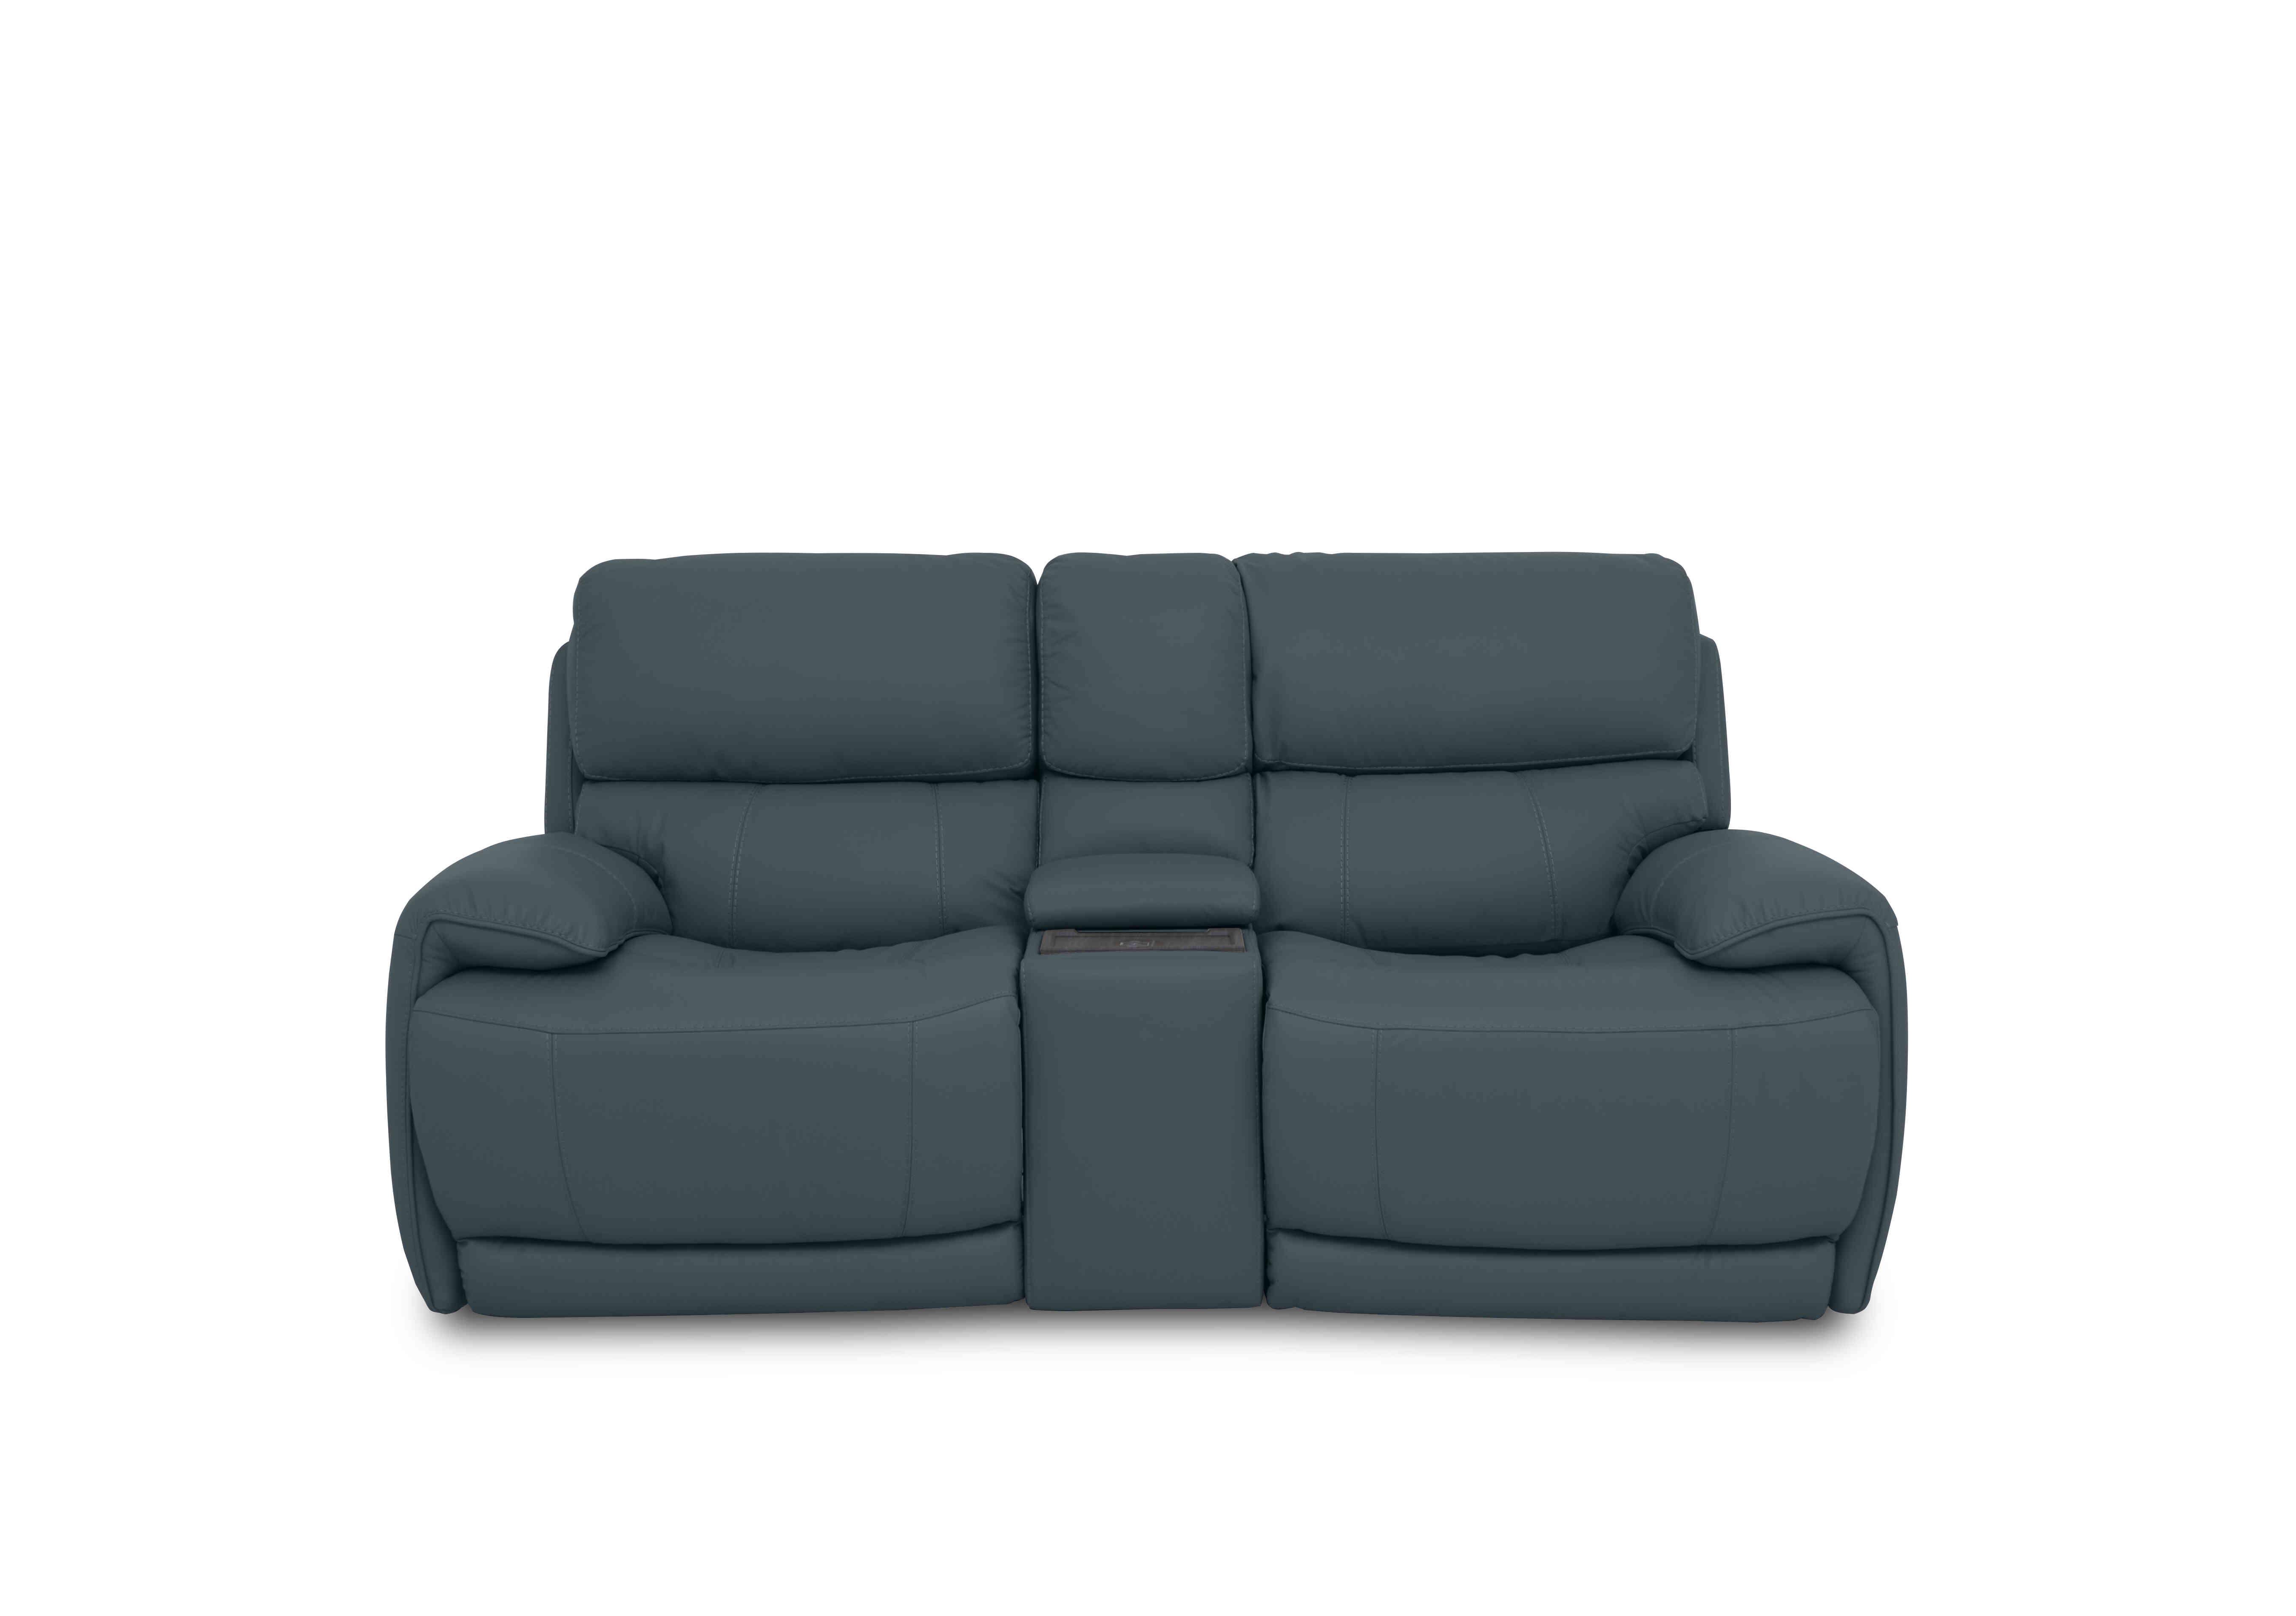 Rocco 2 Seater Leather Power Rocker Sofa with Cup Holders and Power Headrests in Bv-313e Ocean Blue on Furniture Village